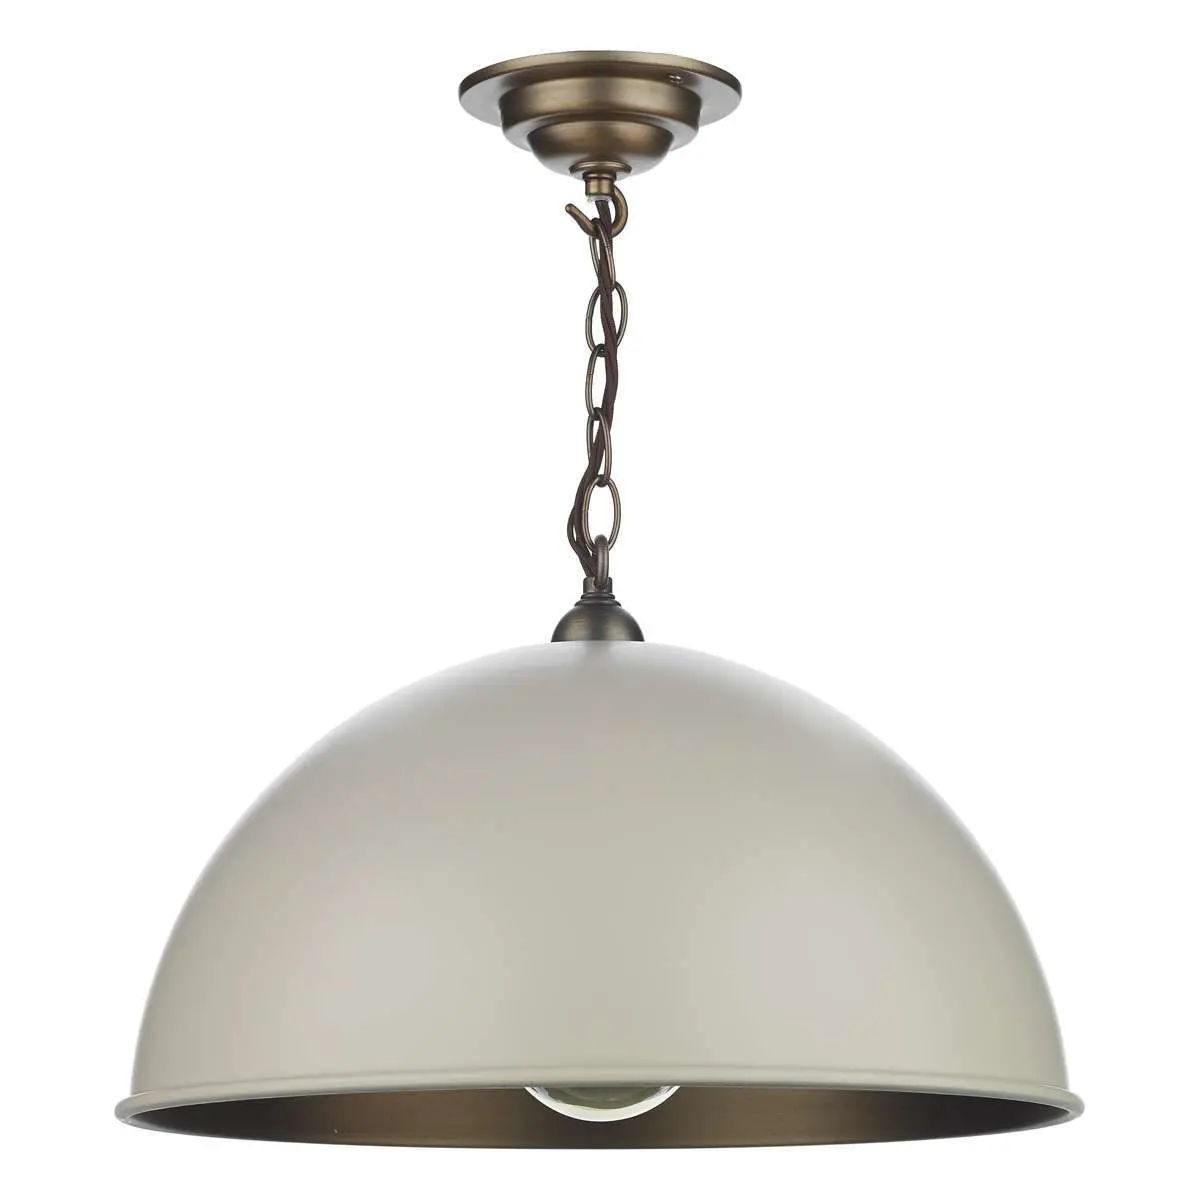 Ealing Small Pendant in Cotswold Cream